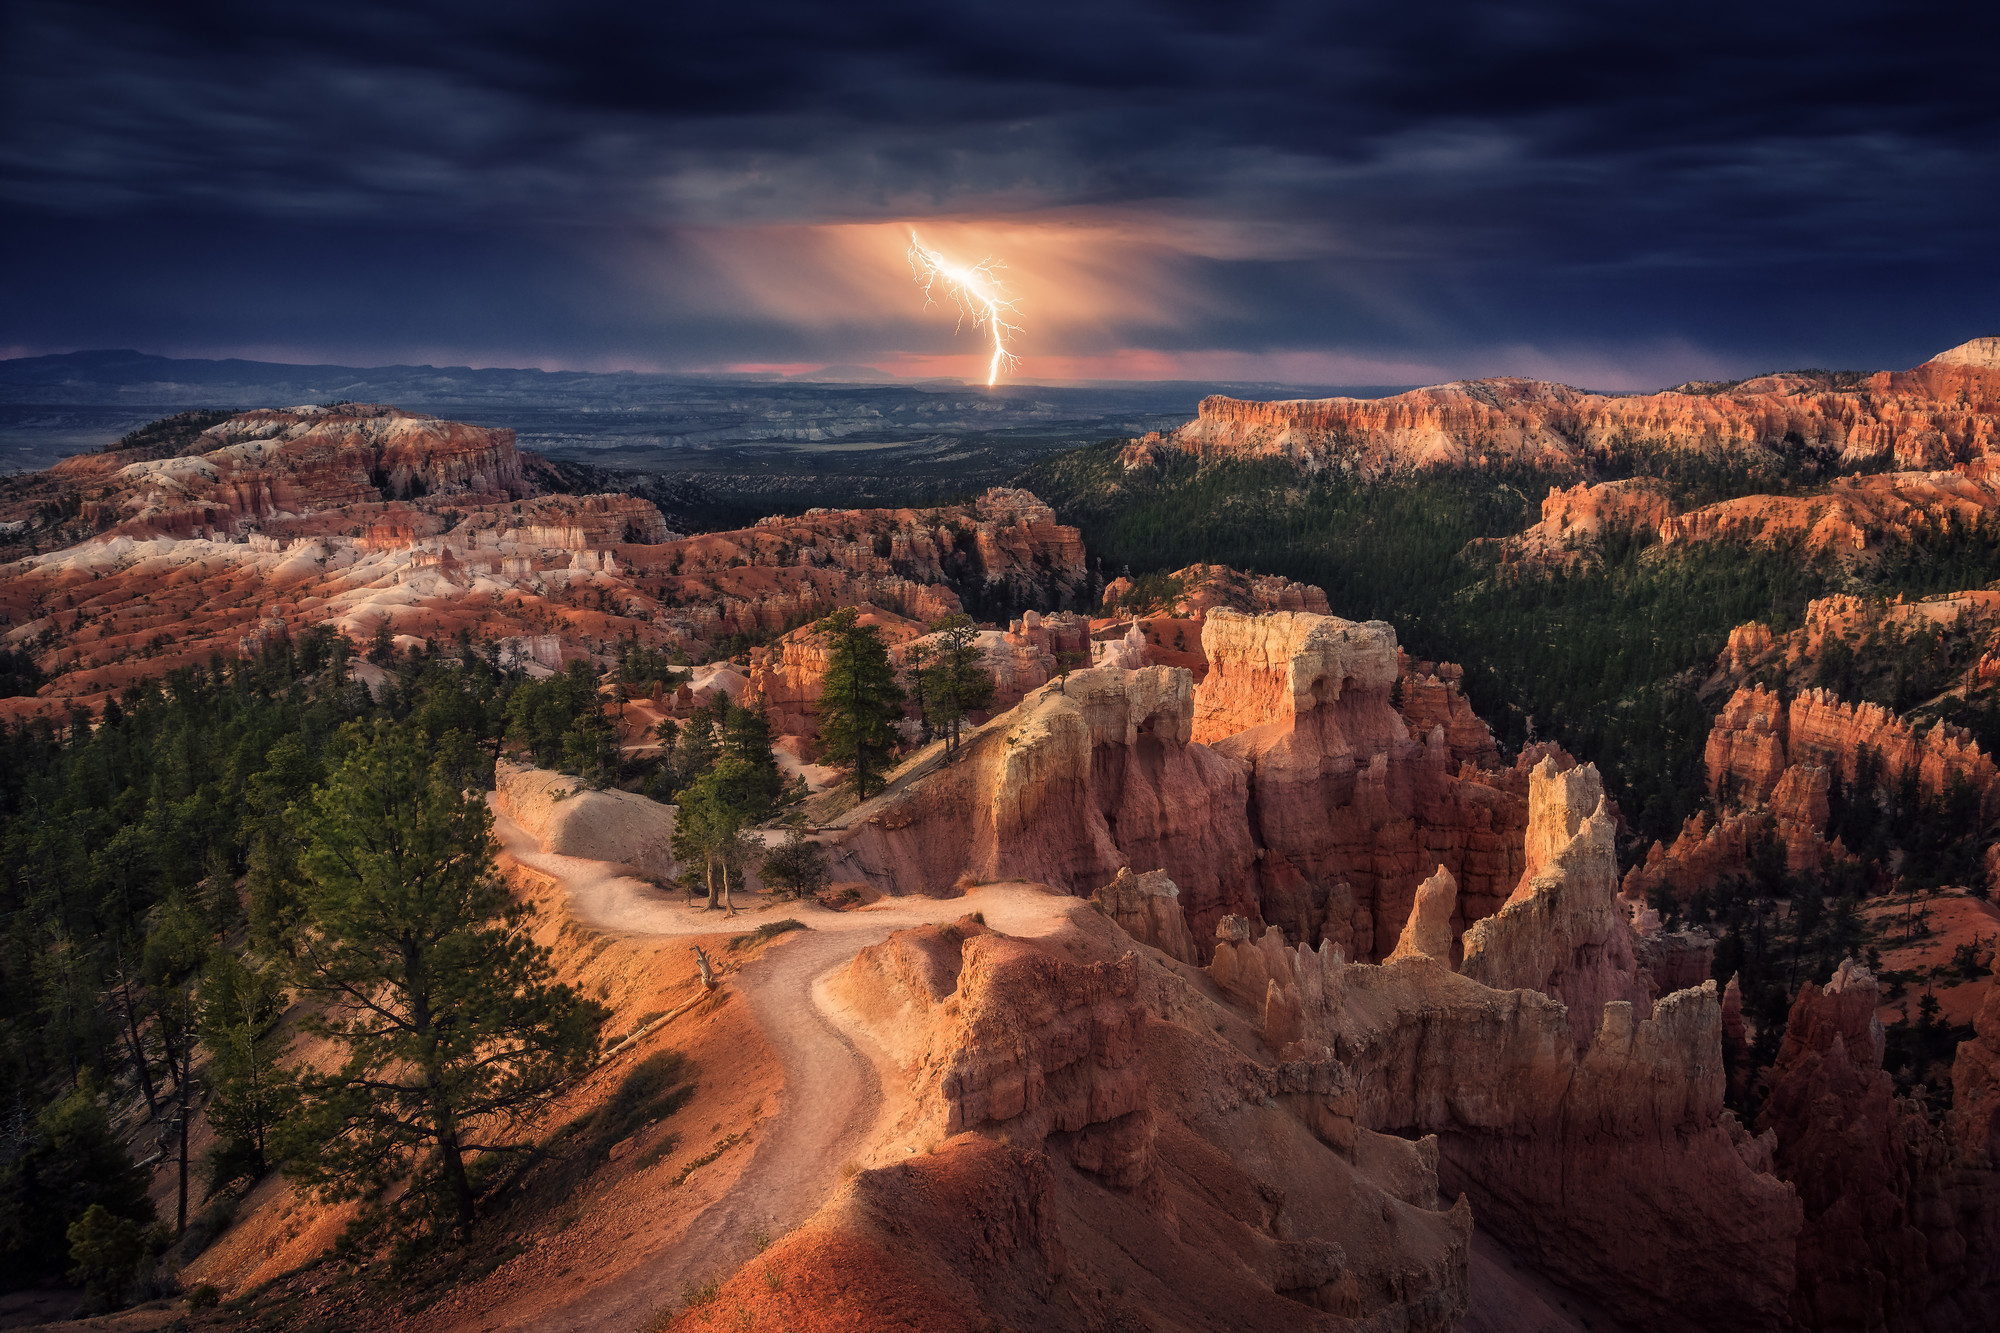 2000x1333 Lightning over Bryce Canyon Wall Mural Photo Wallpaper